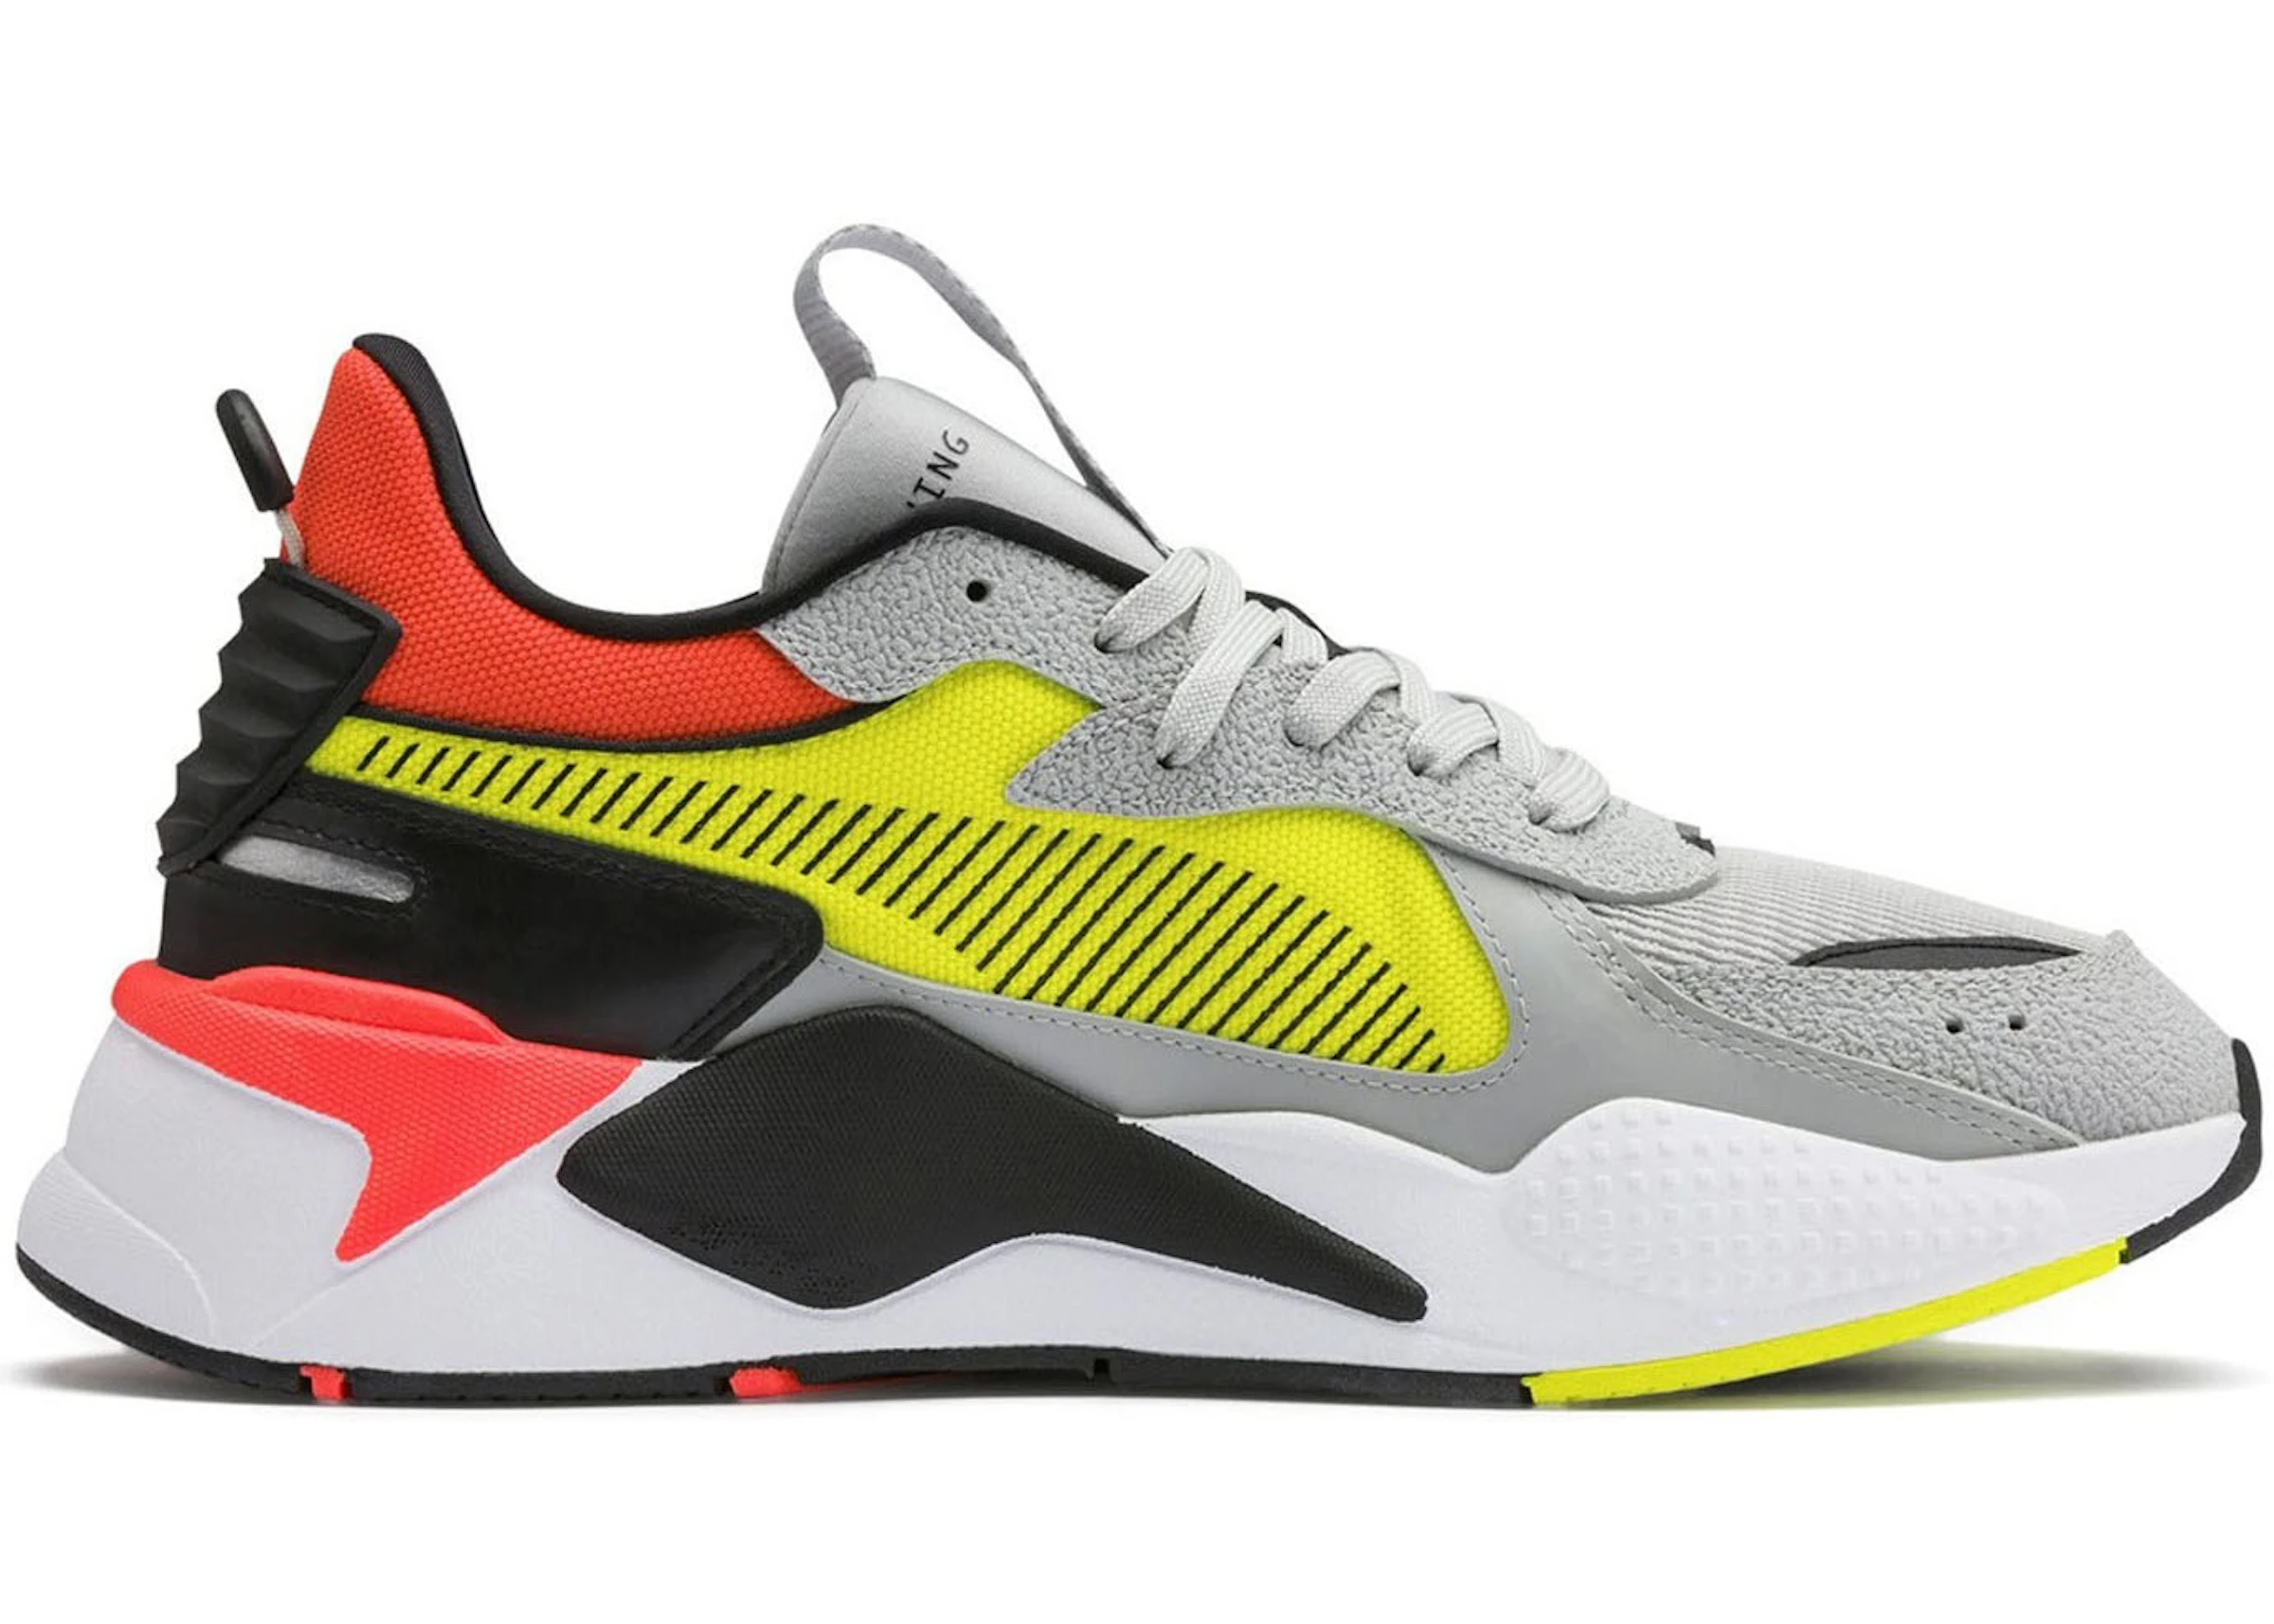 Incentive taxi Hates Puma RS-X Harddrive Grey Yellow Red - 369818-01 - US